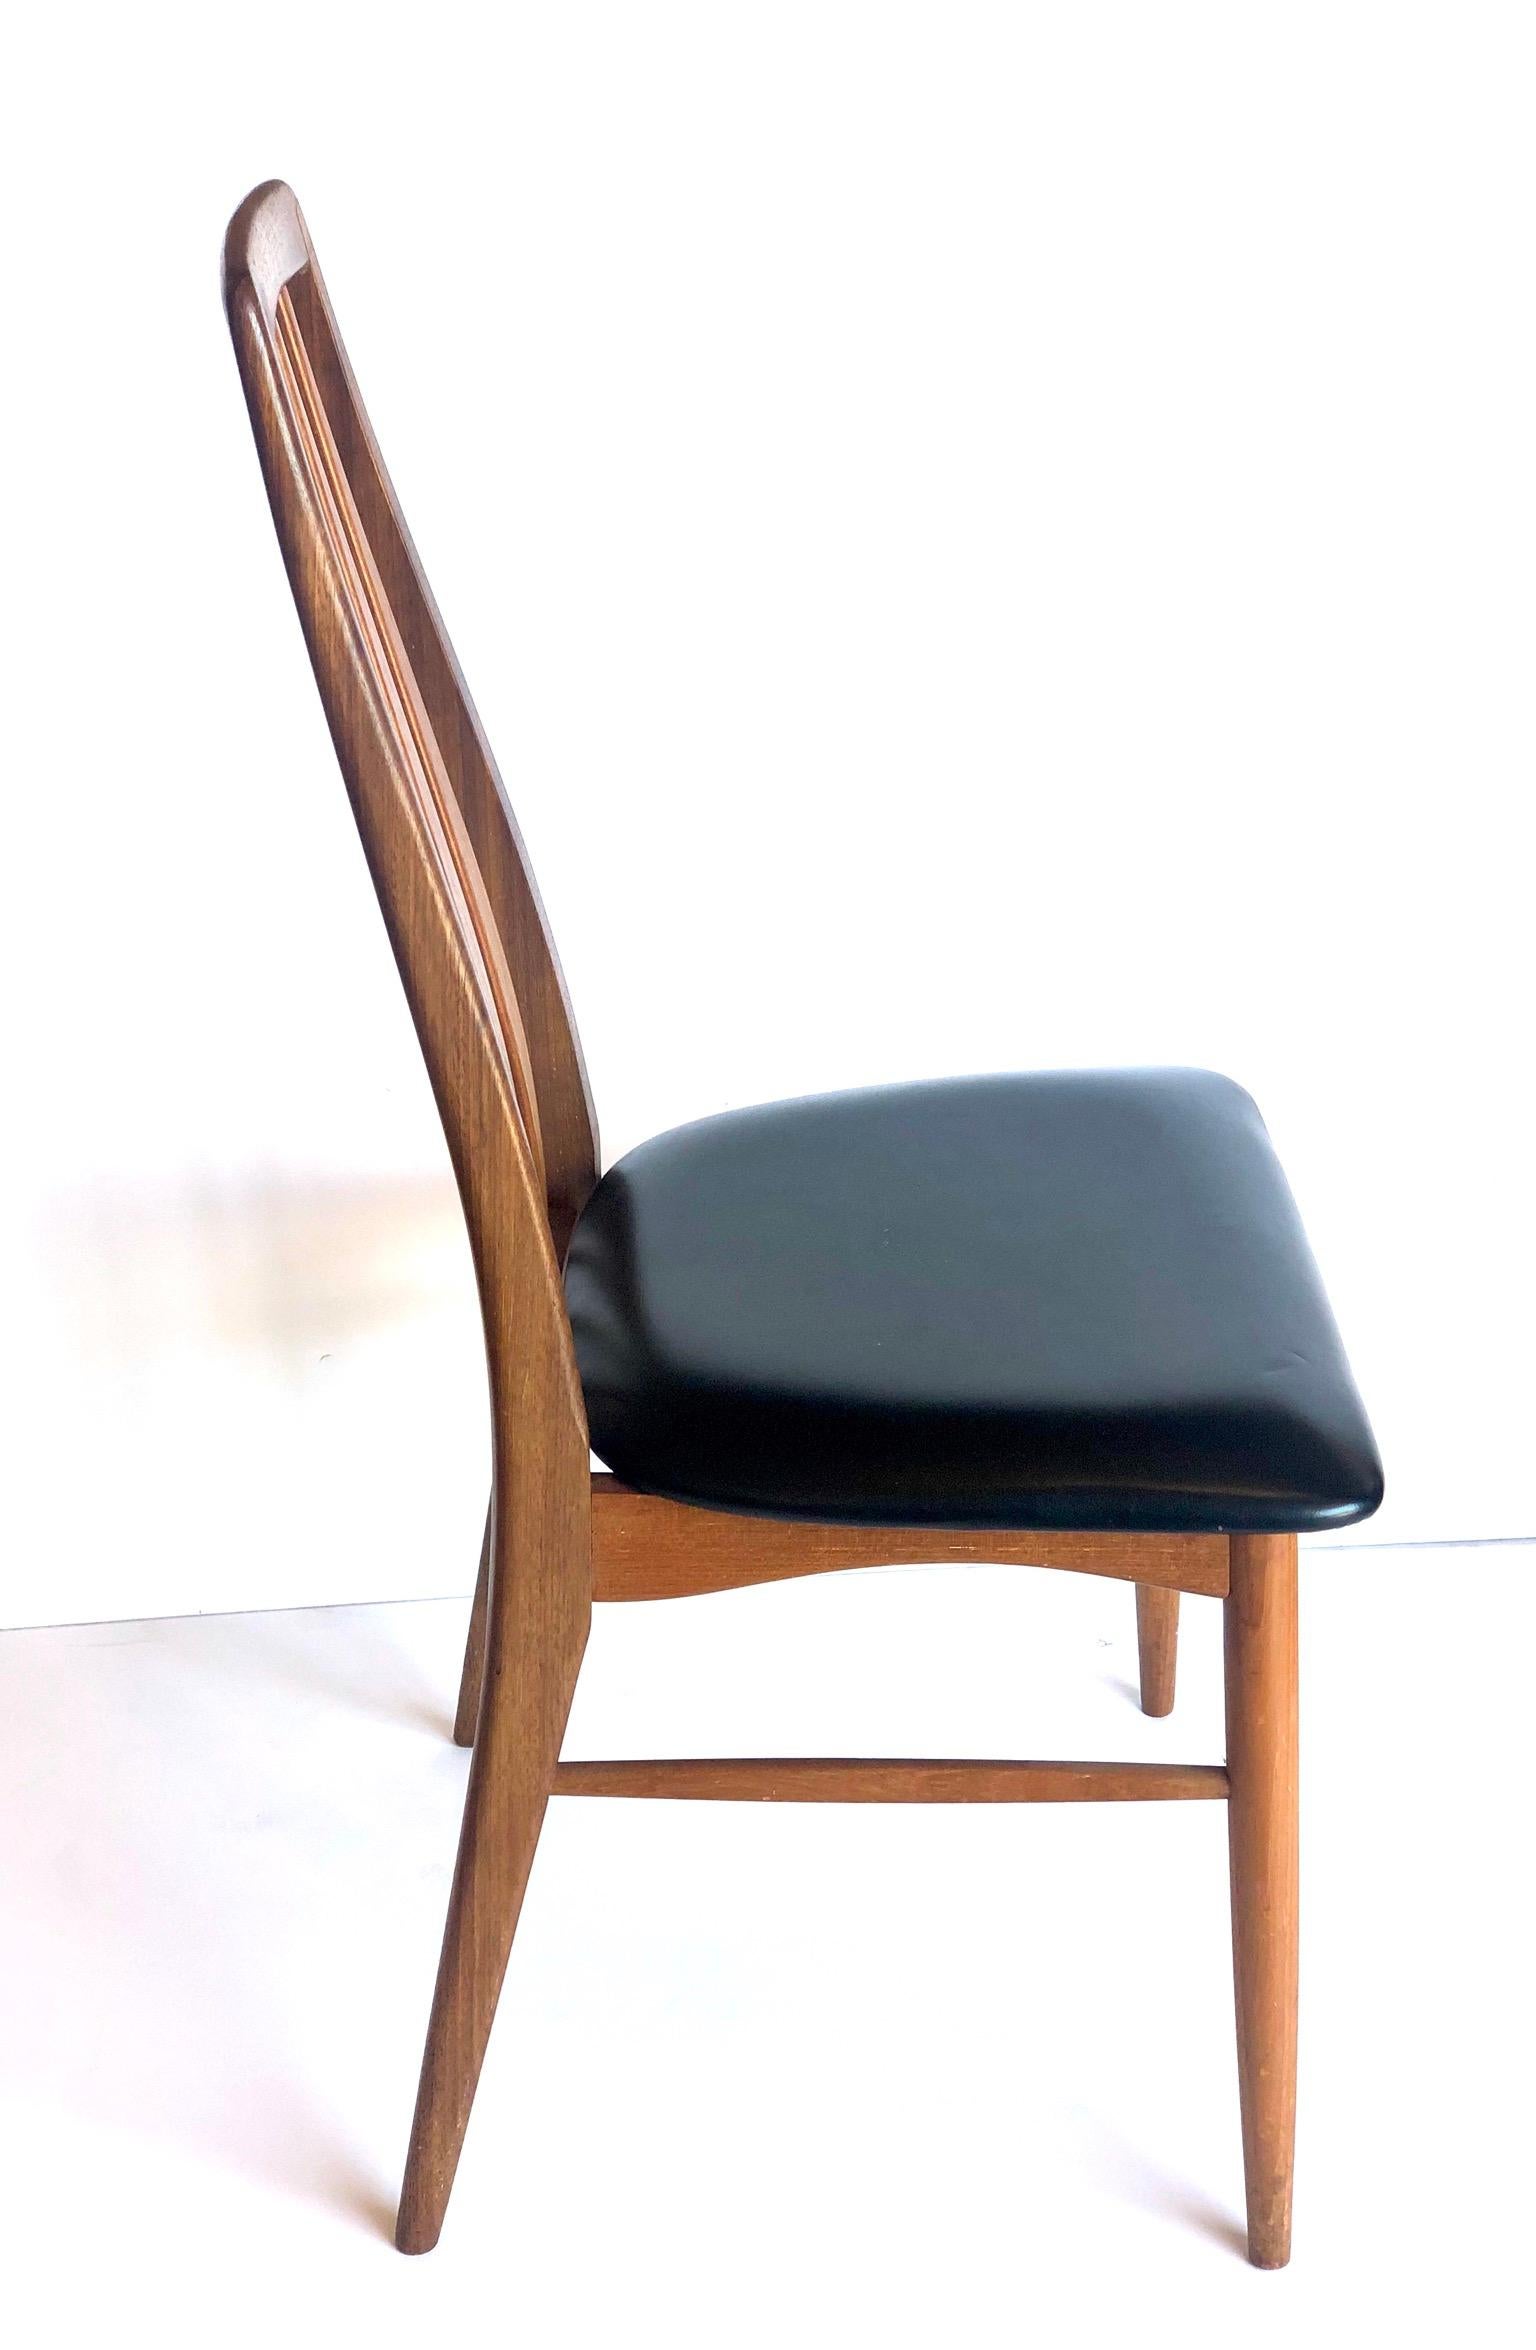 Elegant lines and beauty on this single tall back chair design by Niels Koefoed, famous Eva chair, solid teak solid and sturdy in its original black naugahyde, stamped on the bottom with Danish control tag.